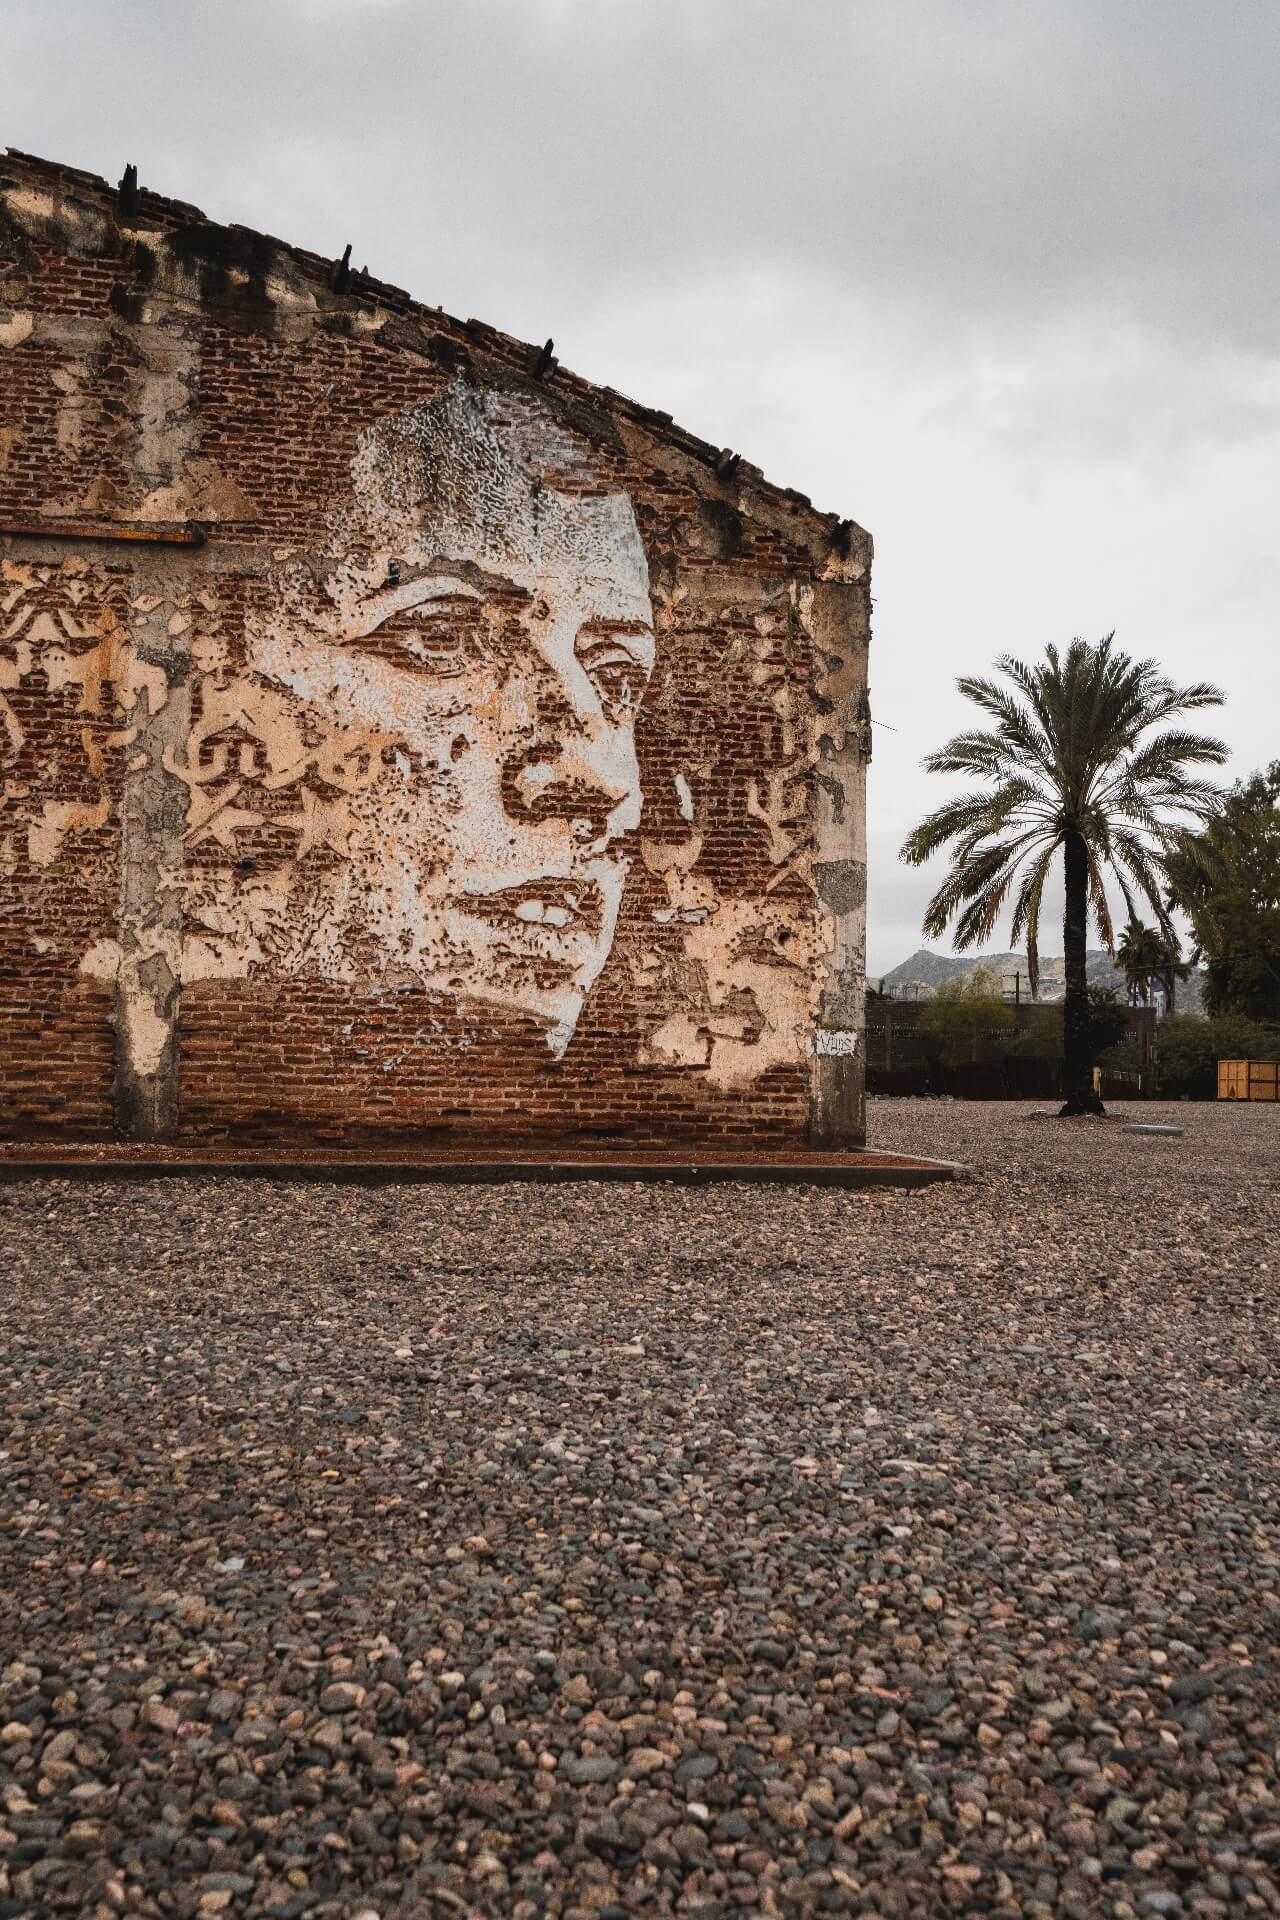 New mural by Vhils in Sonora